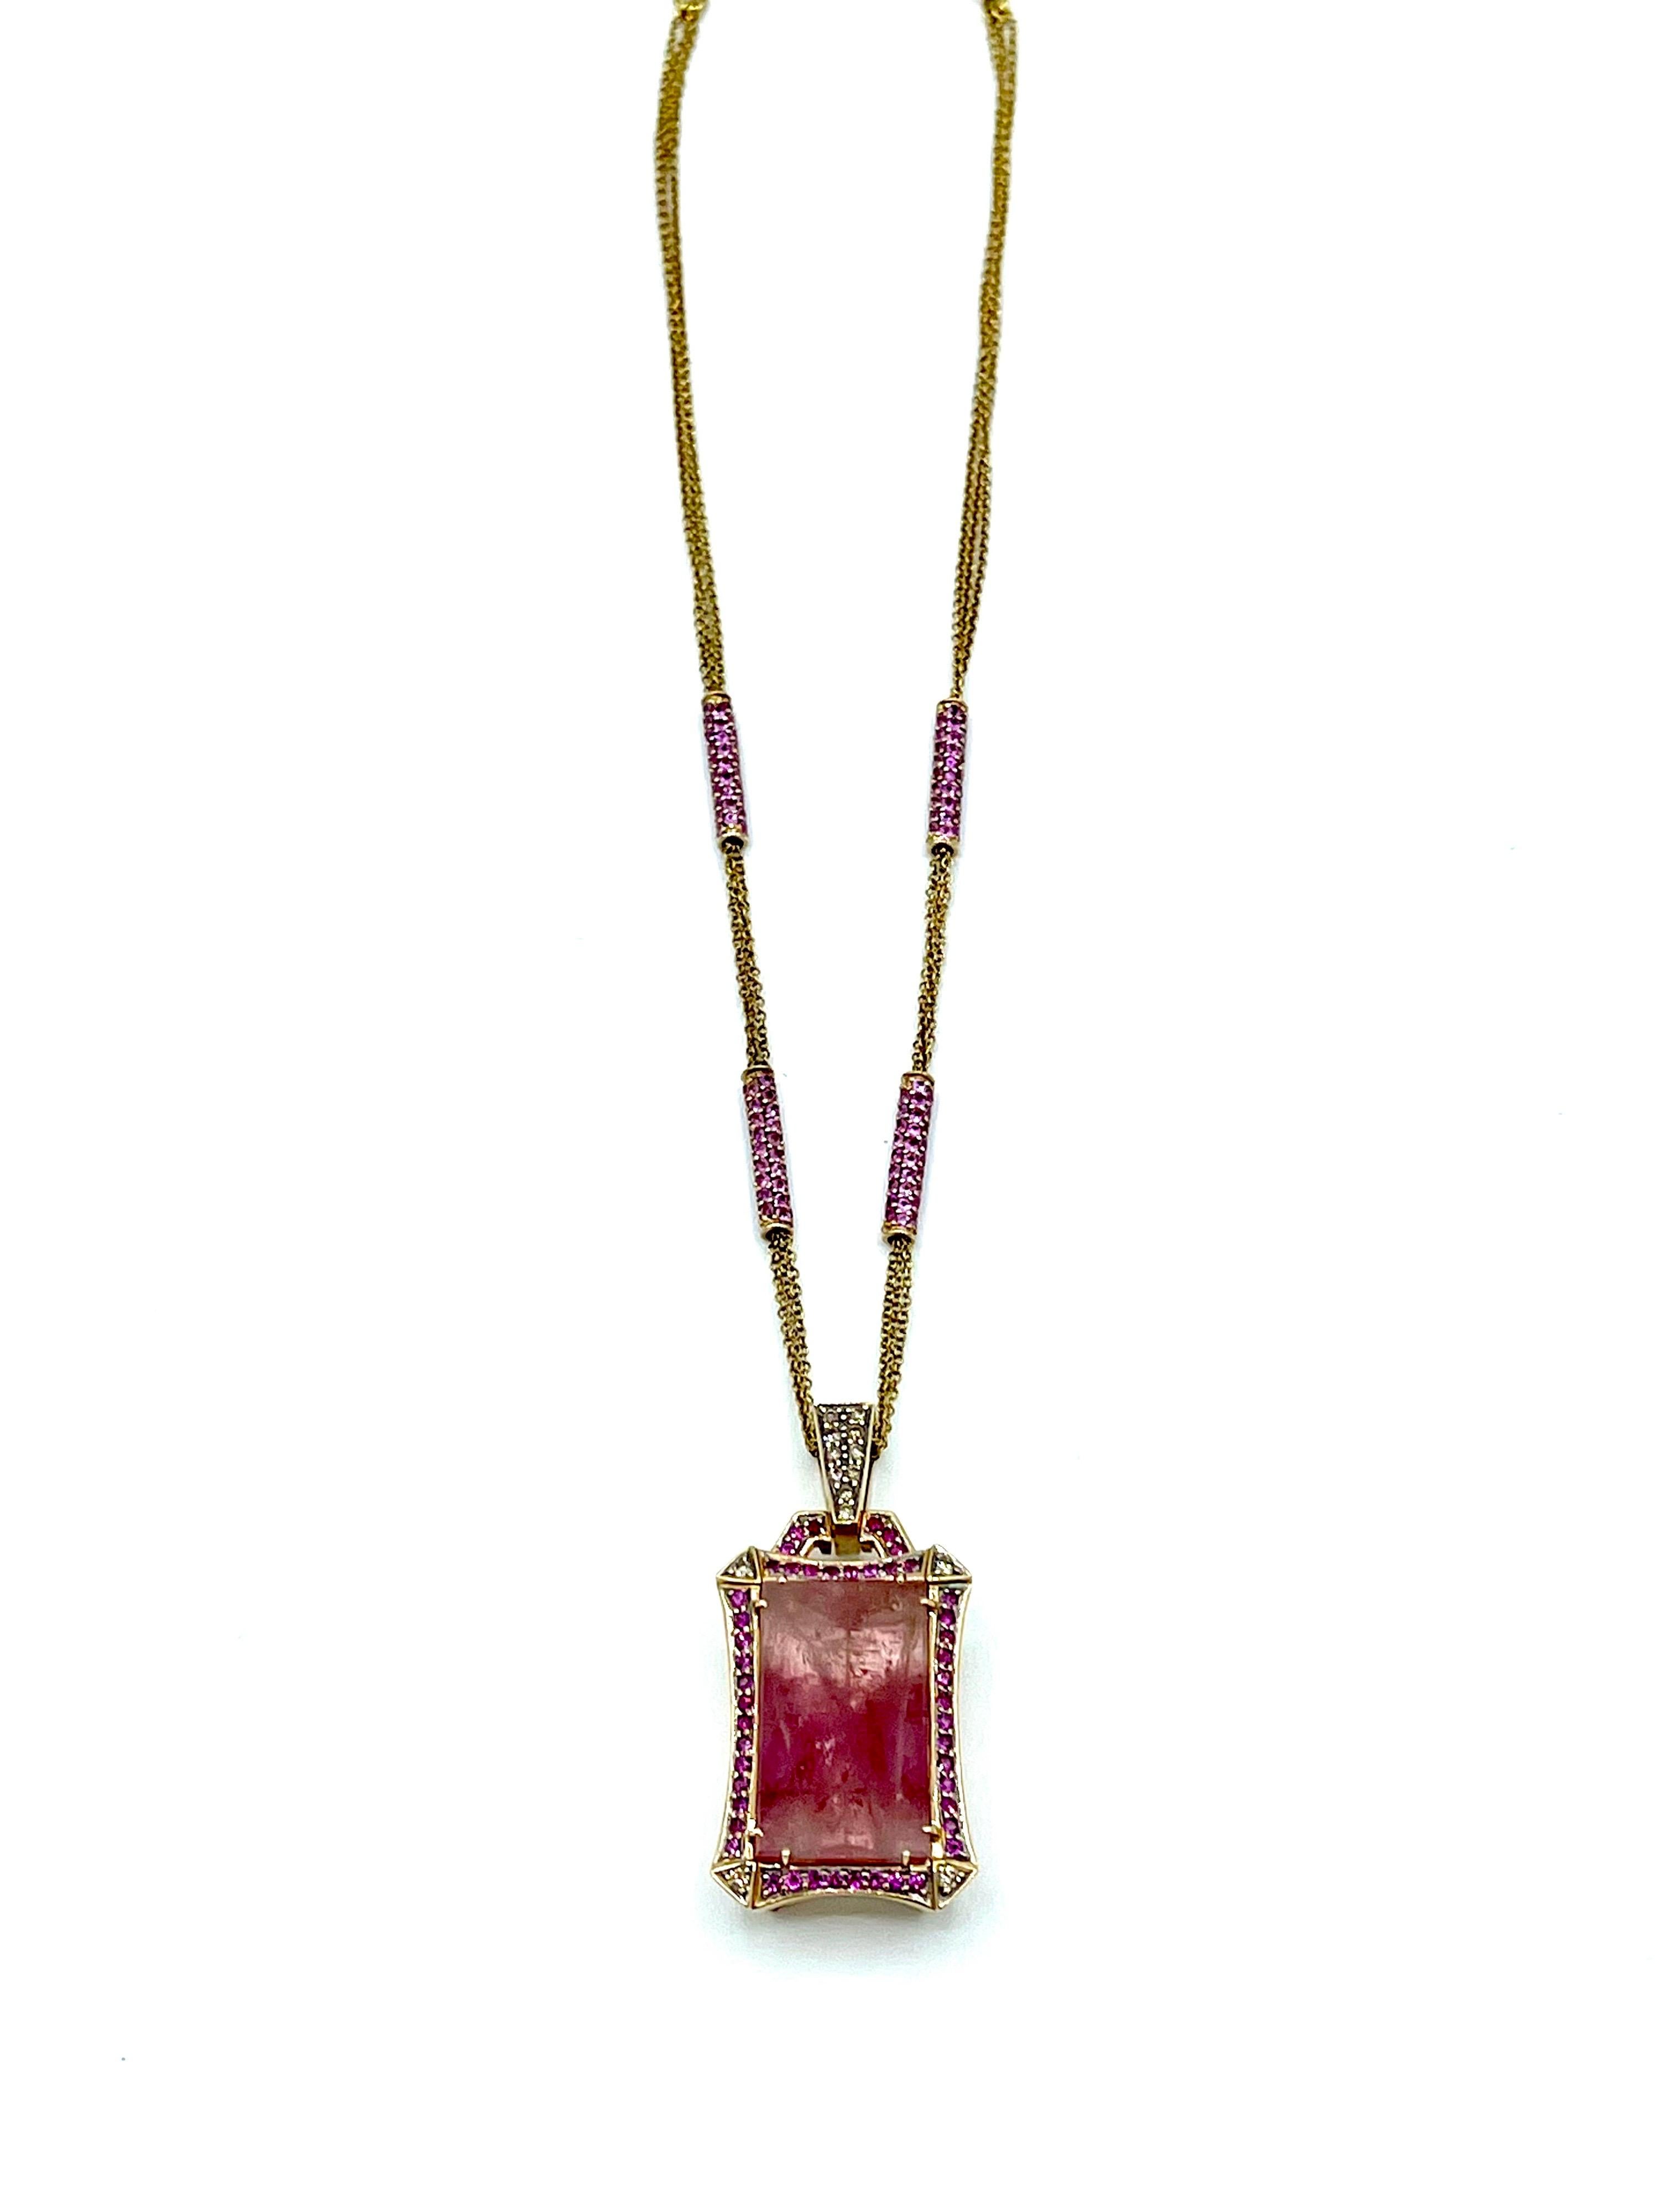 A beautiful emerald cut 35.17 carat Pink Tourmaline pendant necklace.  The Tourmaline is set in eight prongs, and surrounded by a single row of Rubellite Tourmalines, with light brown Diamond corners, suspended from a light brown Diamond bale in 18K